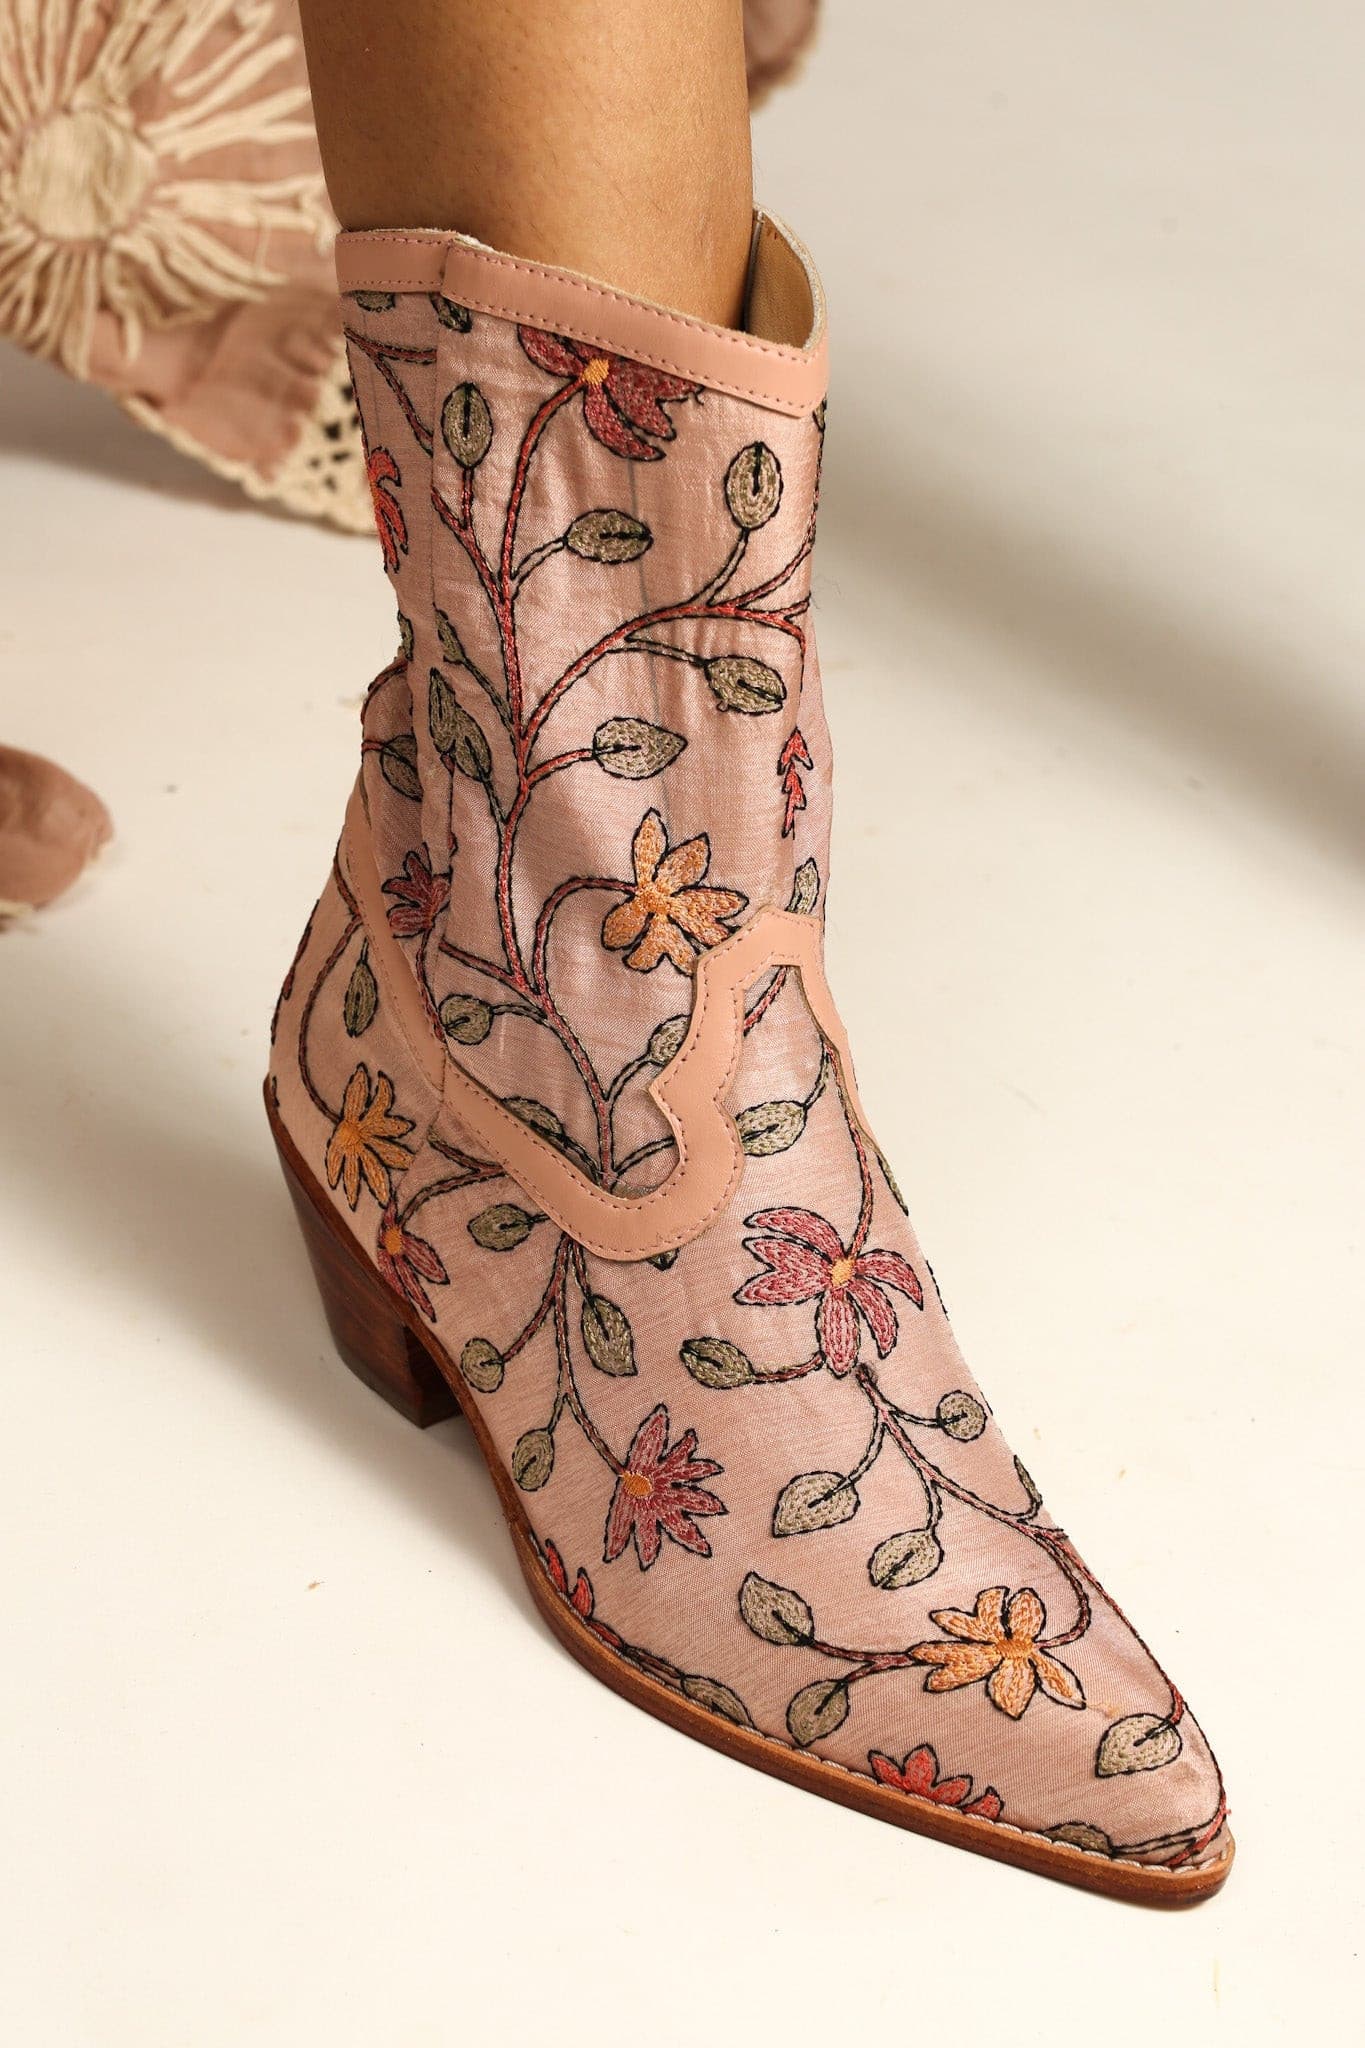 EMBROIDERED BOOTS BEATA - sustainably made MOMO NEW YORK sustainable clothing, boots slow fashion